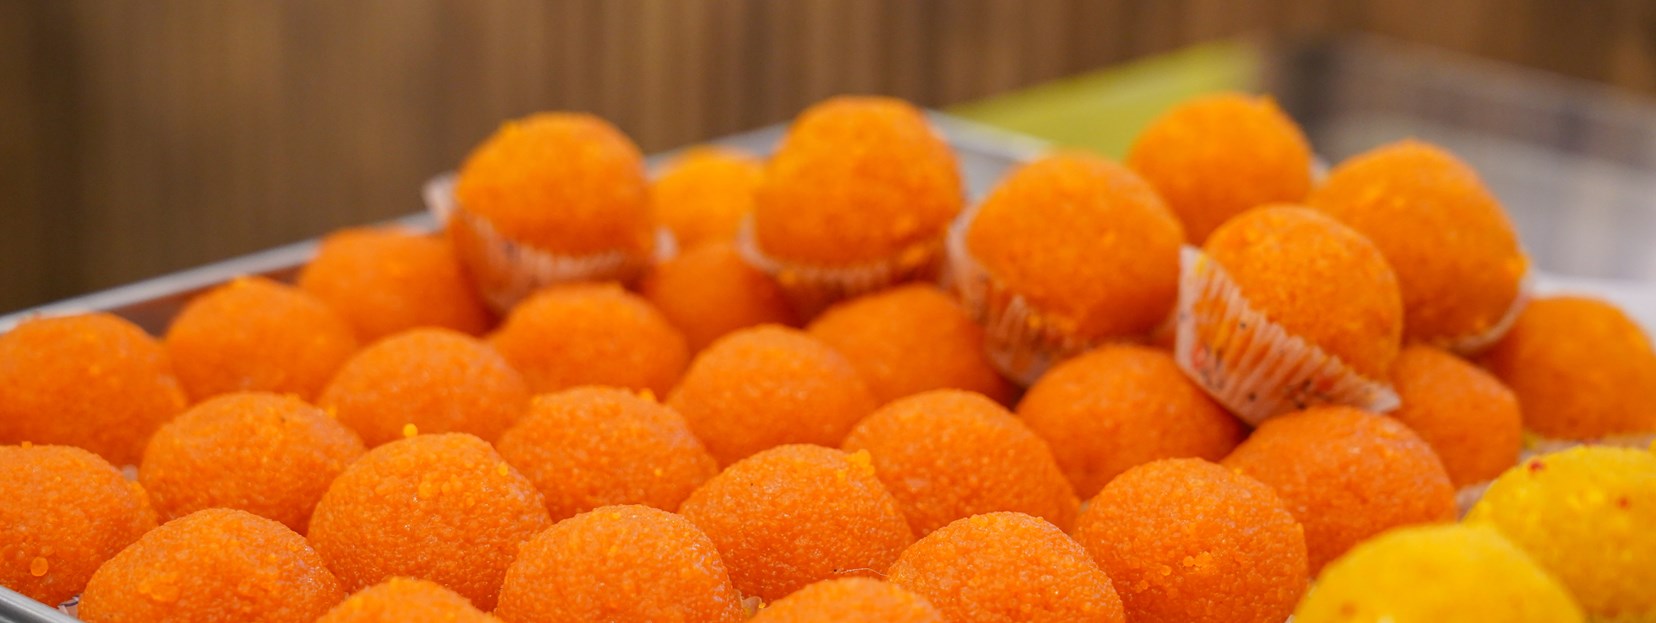 Royal Mithai: Enjoy The Best Indian Sweets in Mauritius